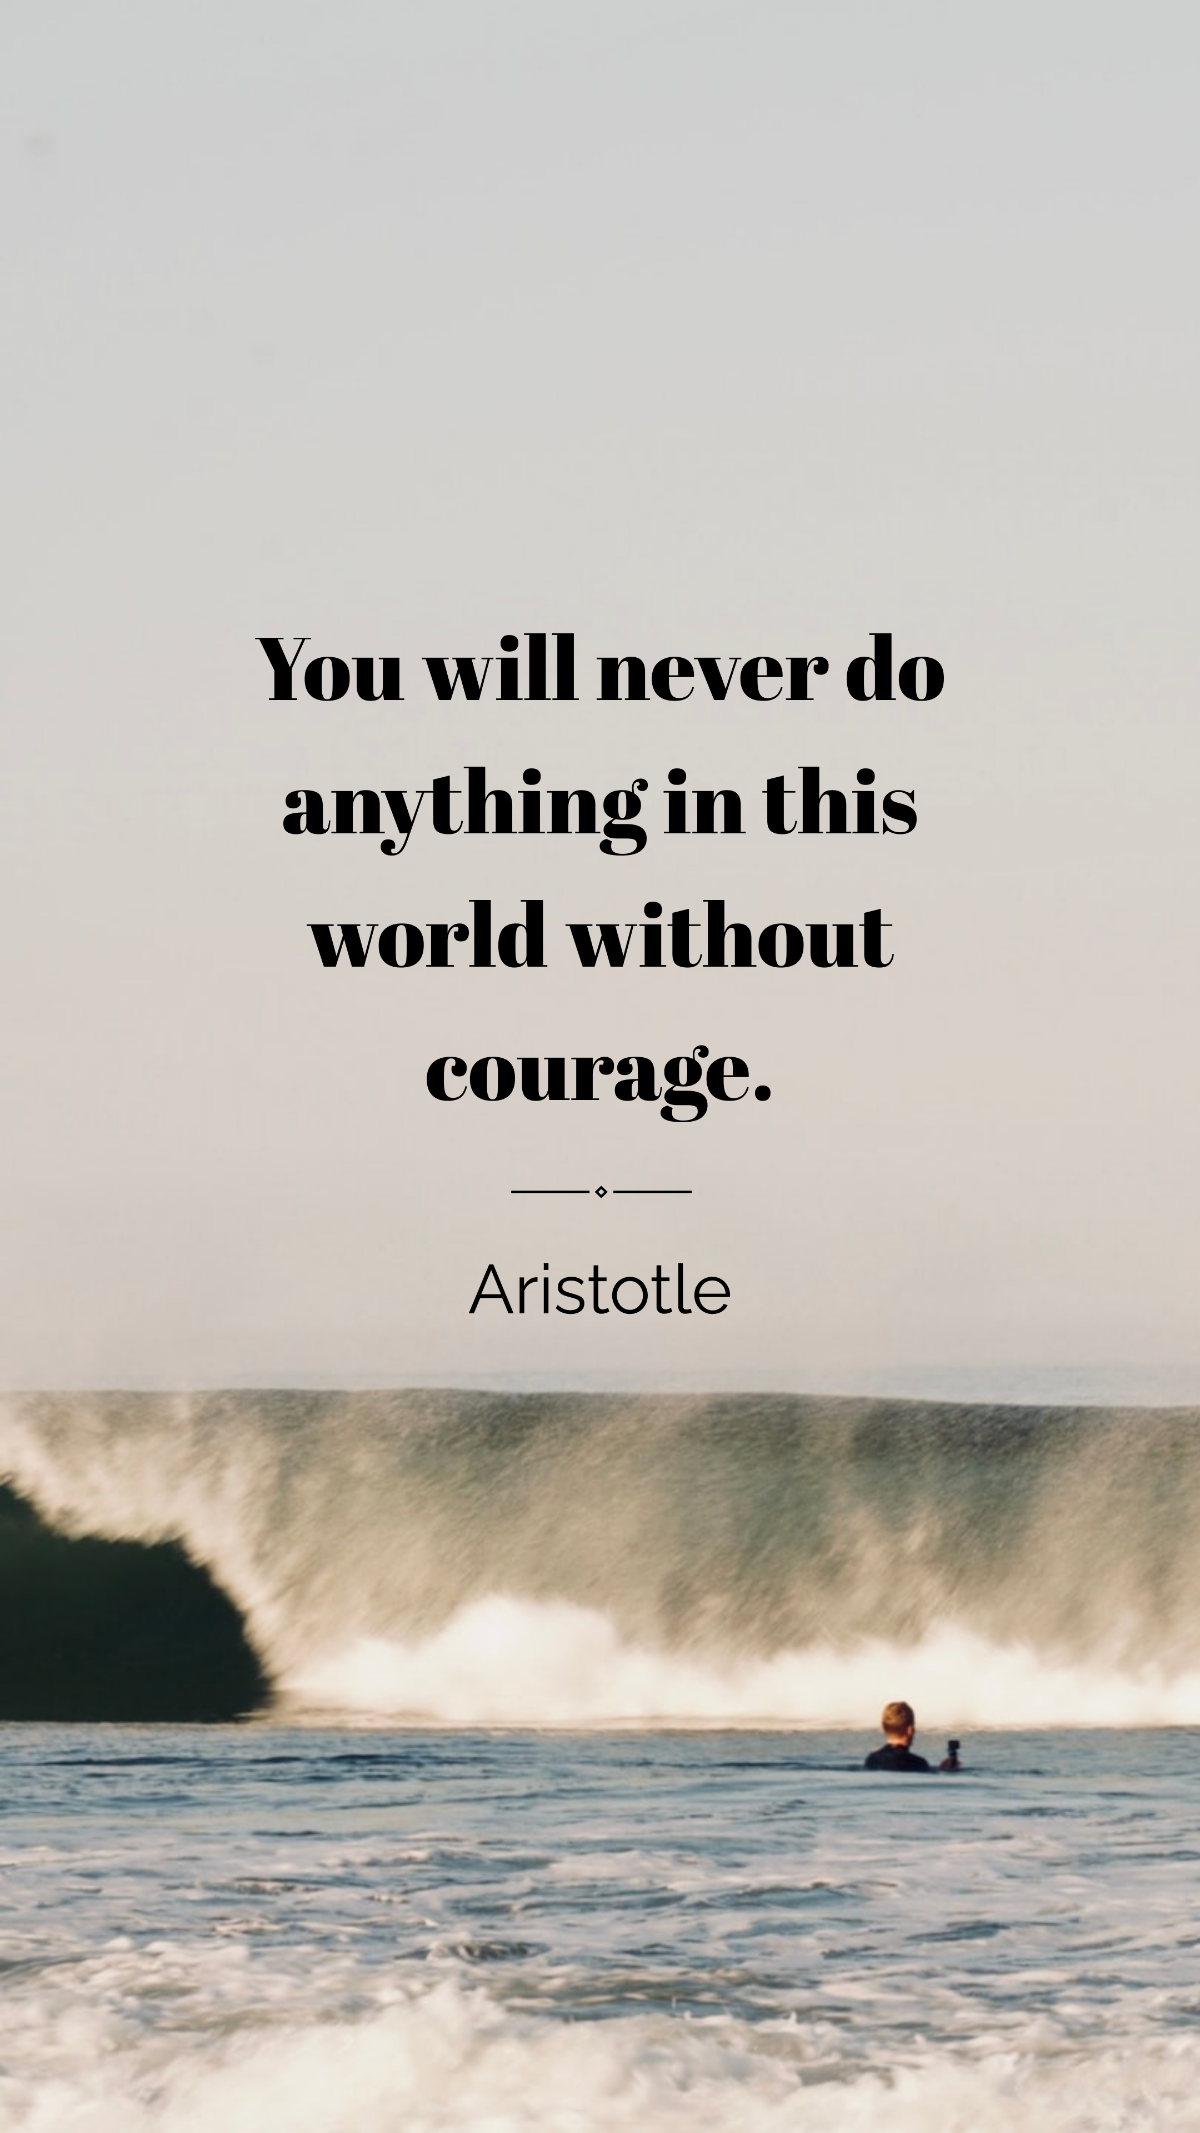 Aristotle - You will never do anything in this world without courage. Template